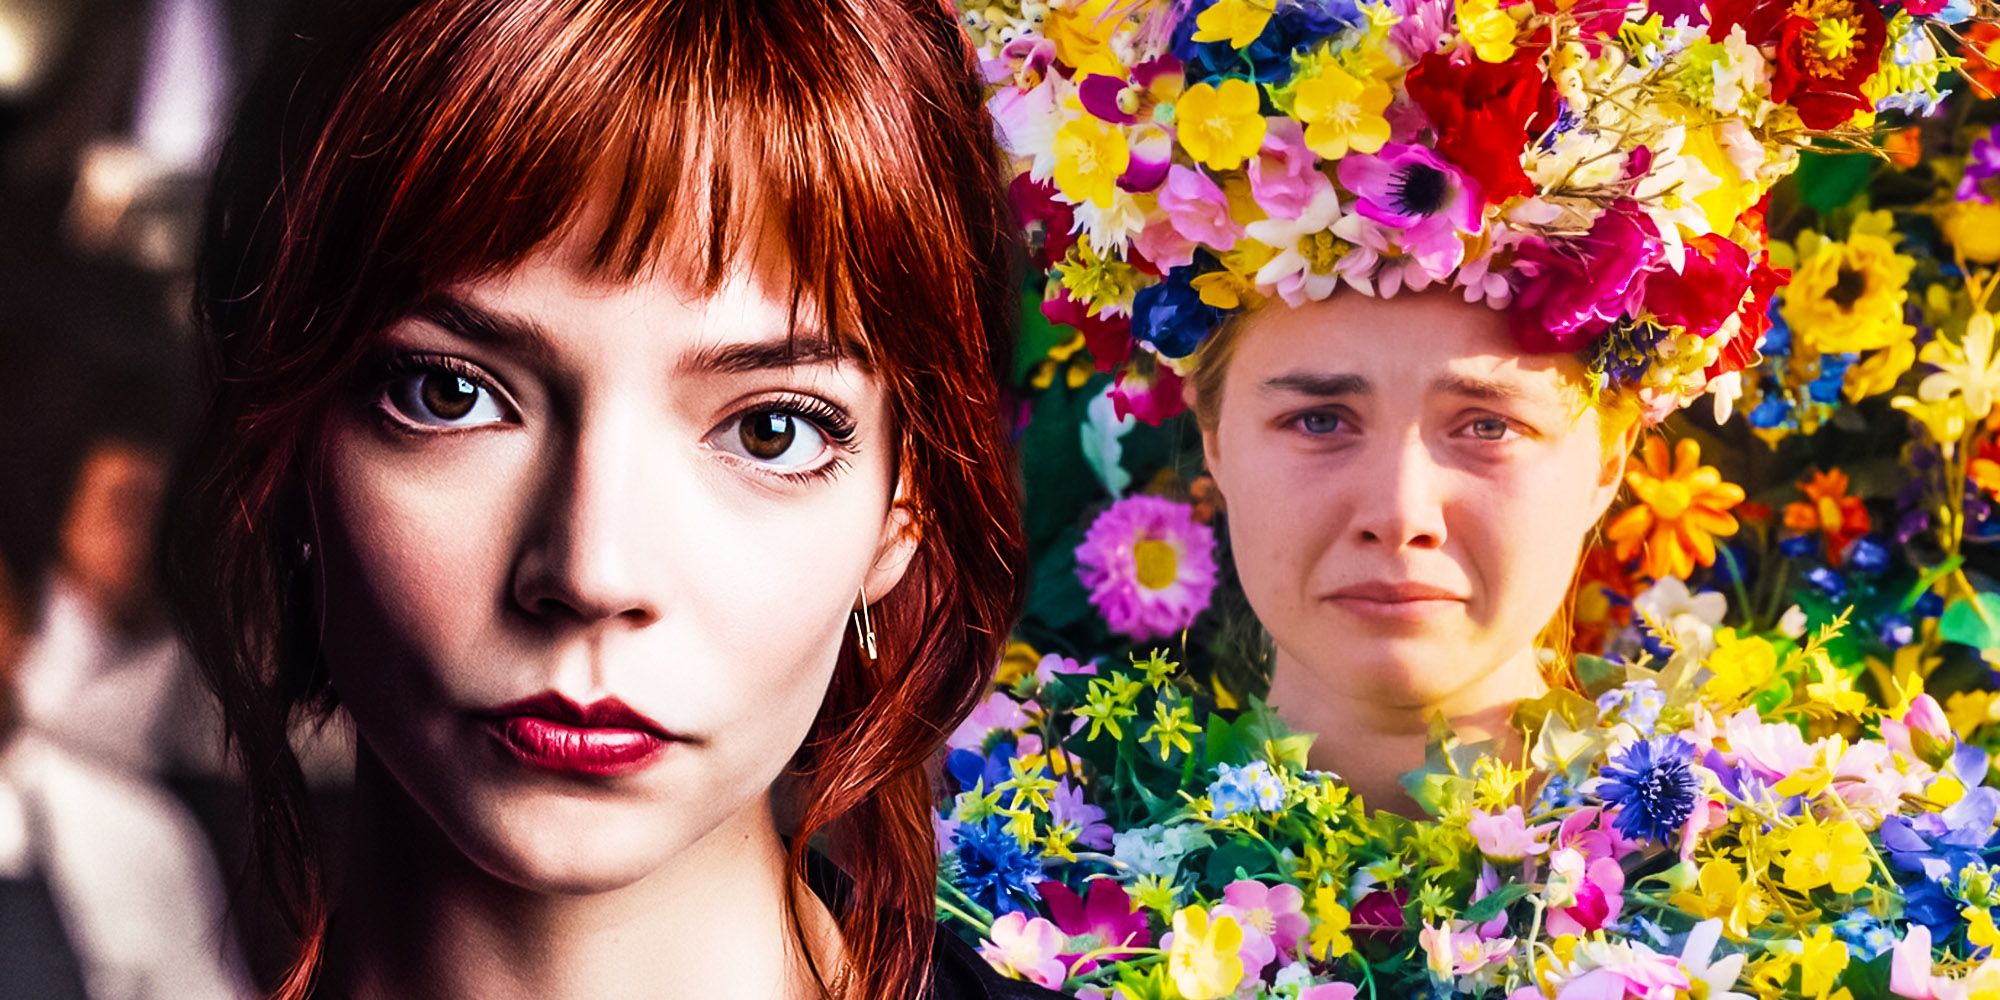 Anya Taylor-Joy as Margot in The Menu and Florence Pugh as Dani in Midsommar